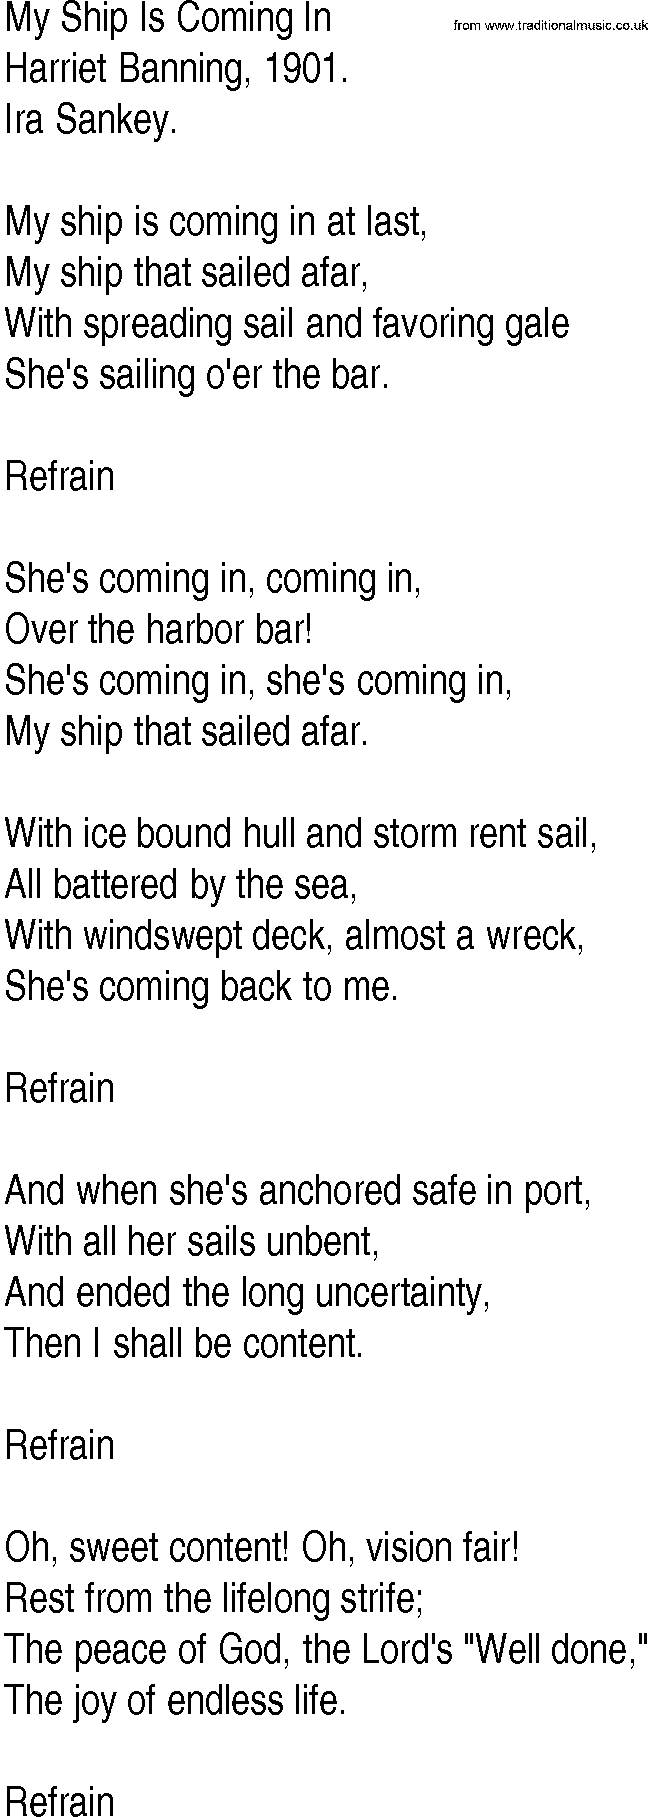 Hymn and Gospel Song: My Ship Is Coming In by Harriet Banning lyrics